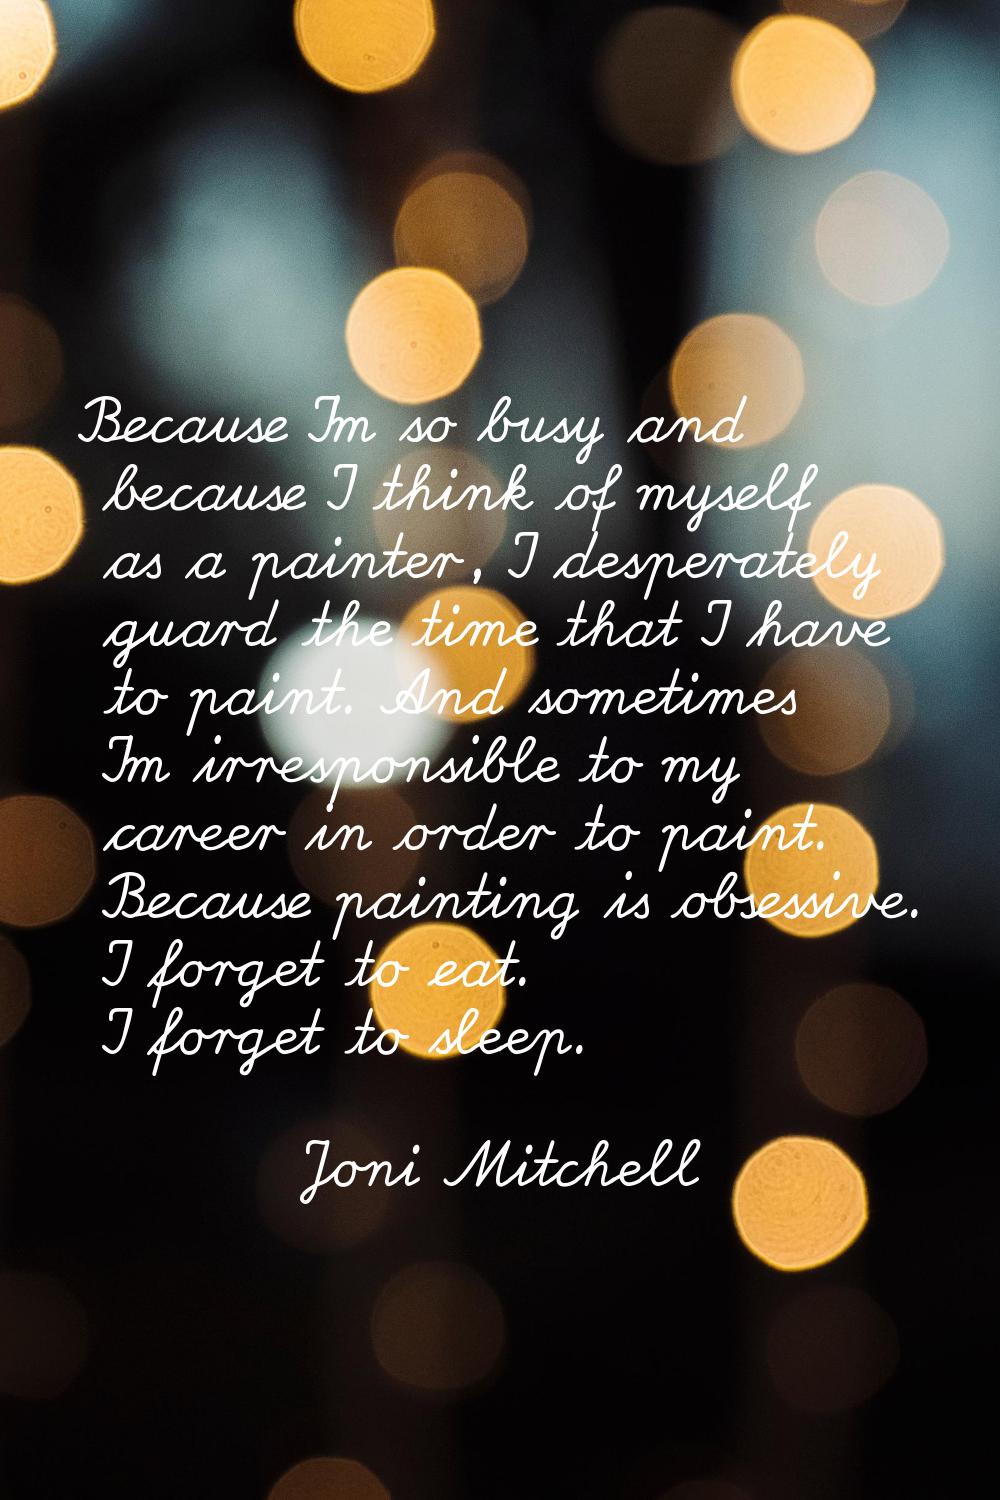 Because I'm so busy and because I think of myself as a painter, I desperately guard the time that I